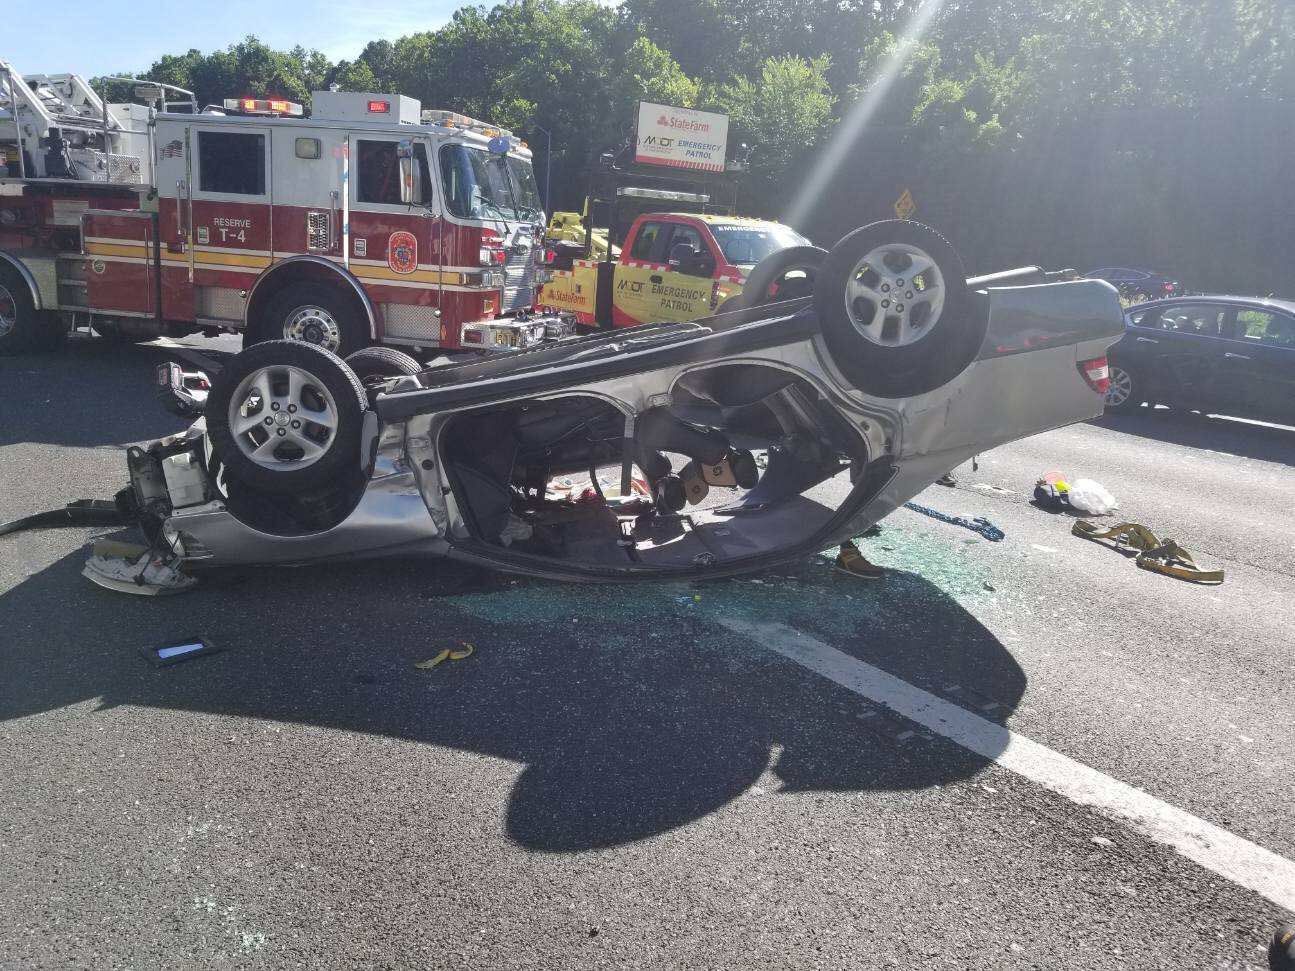 An overturned vehicle delayed rush hour traffic on the Capital Beltway in Bethesda Monday. (Courtesy Pete Piringer)